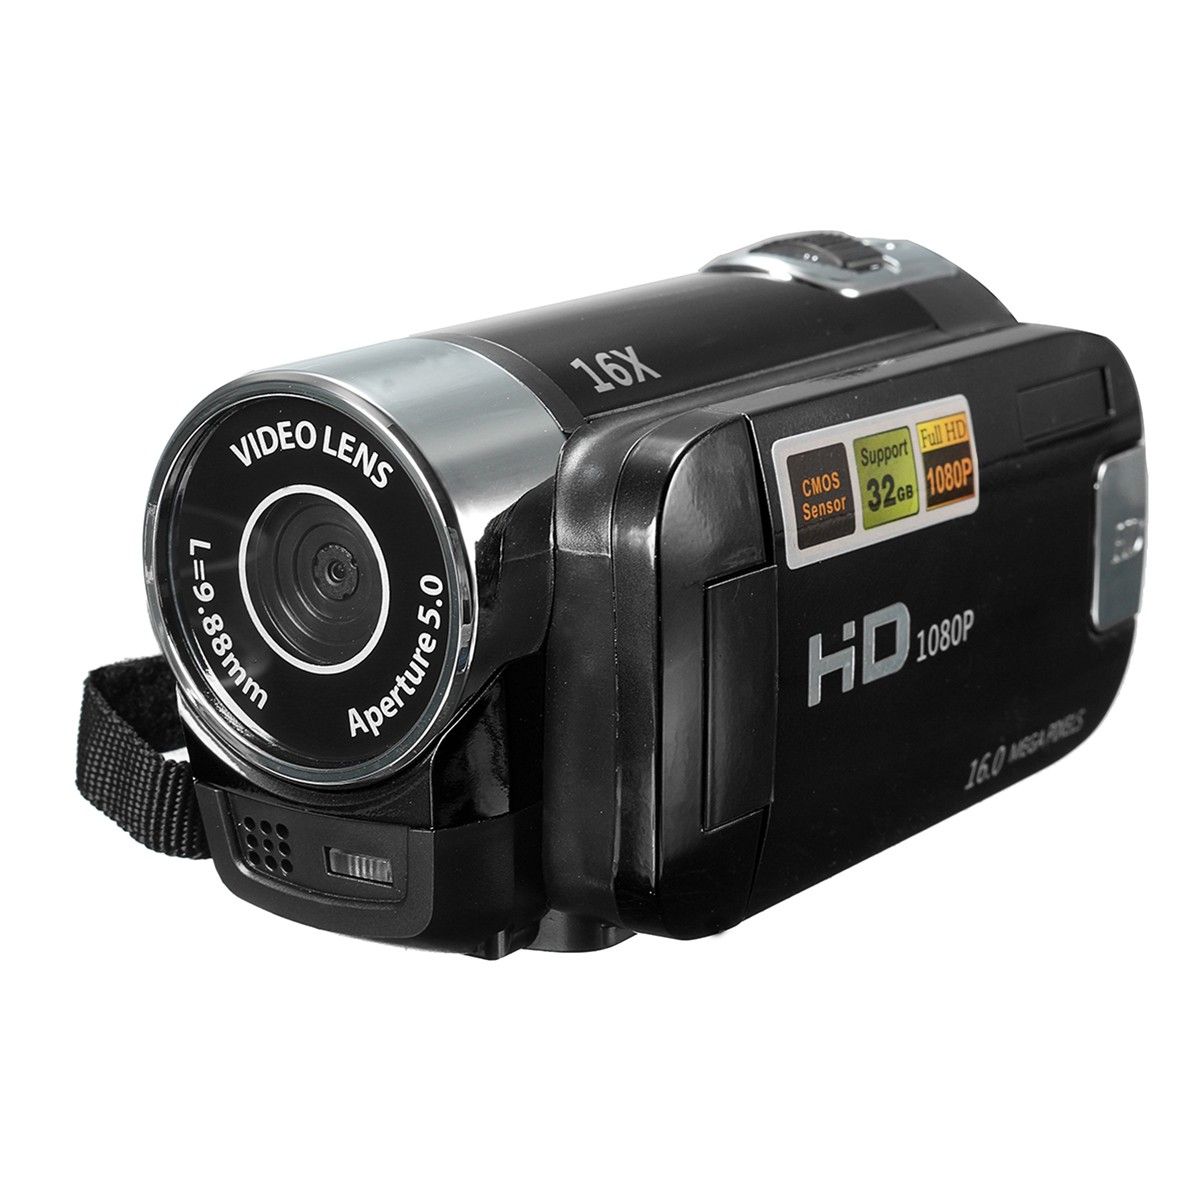 16MP-1080P-HD-Digital-Video-Camcorder-DV-Camera-with-27-Inch-LCD-Screen-1639909